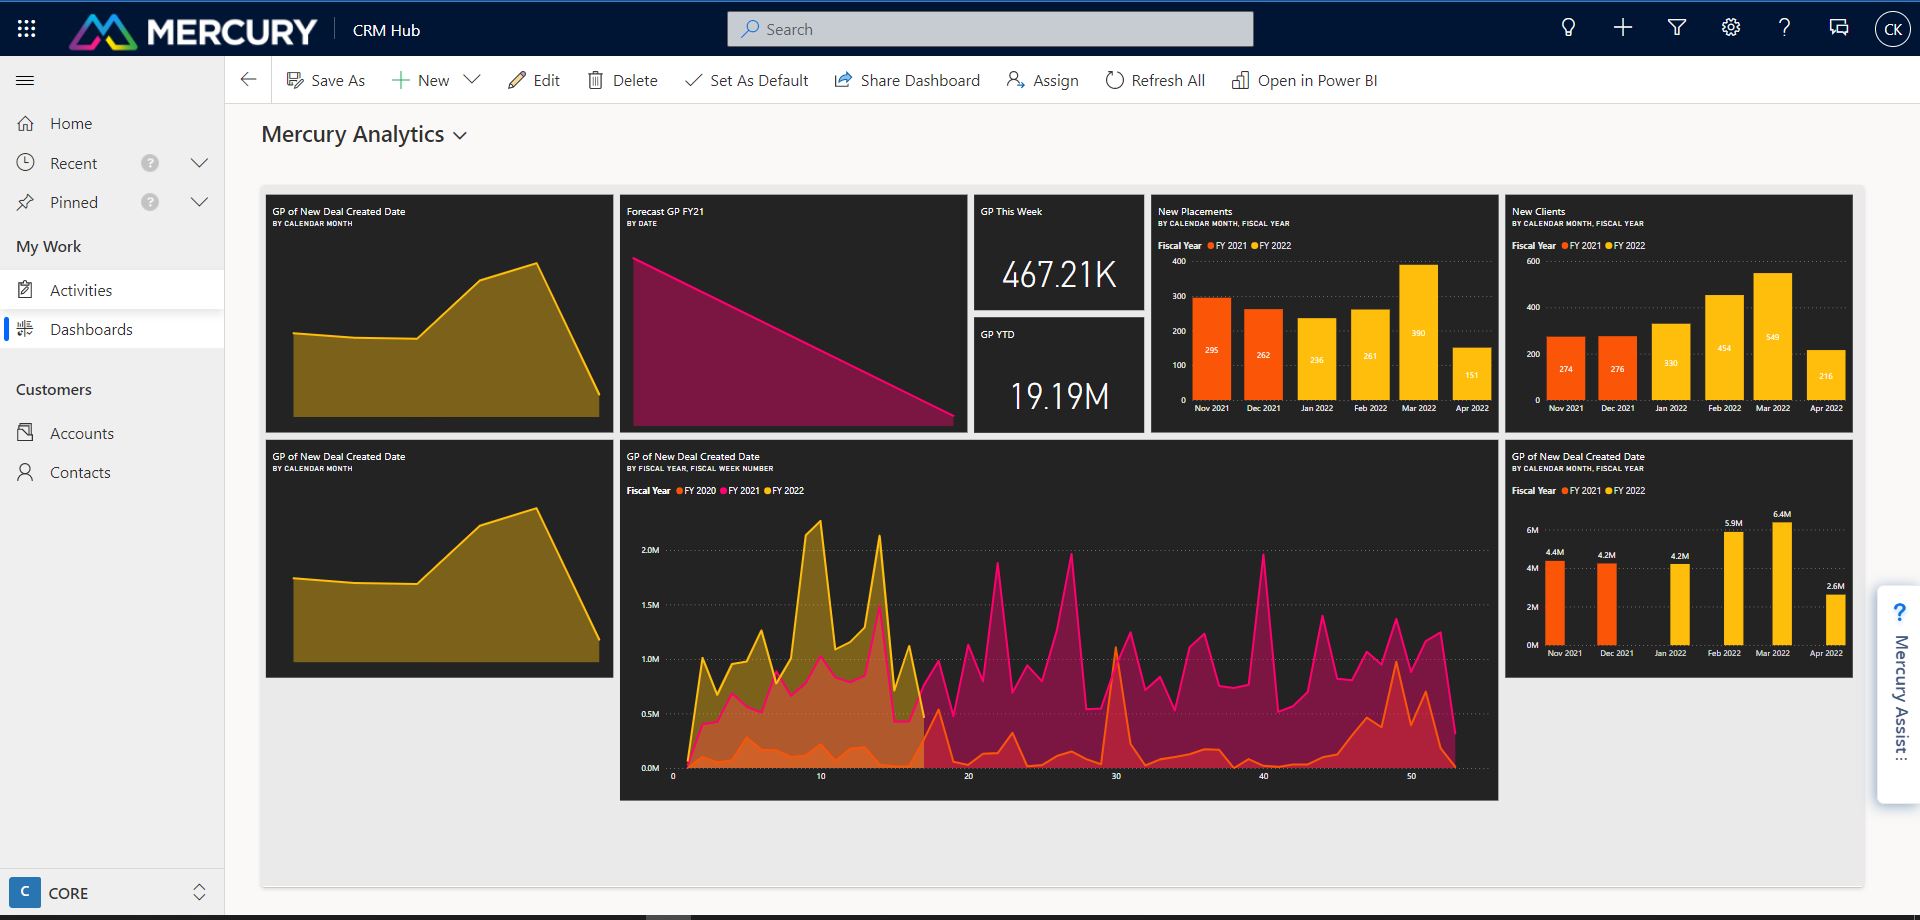 Mercury’s reporting and dashboard capabilities are integrated with Dynamics 365, allowing you to leverage Microsoft Power BI while also providing access and visibility to all data captured across numerous business apps.